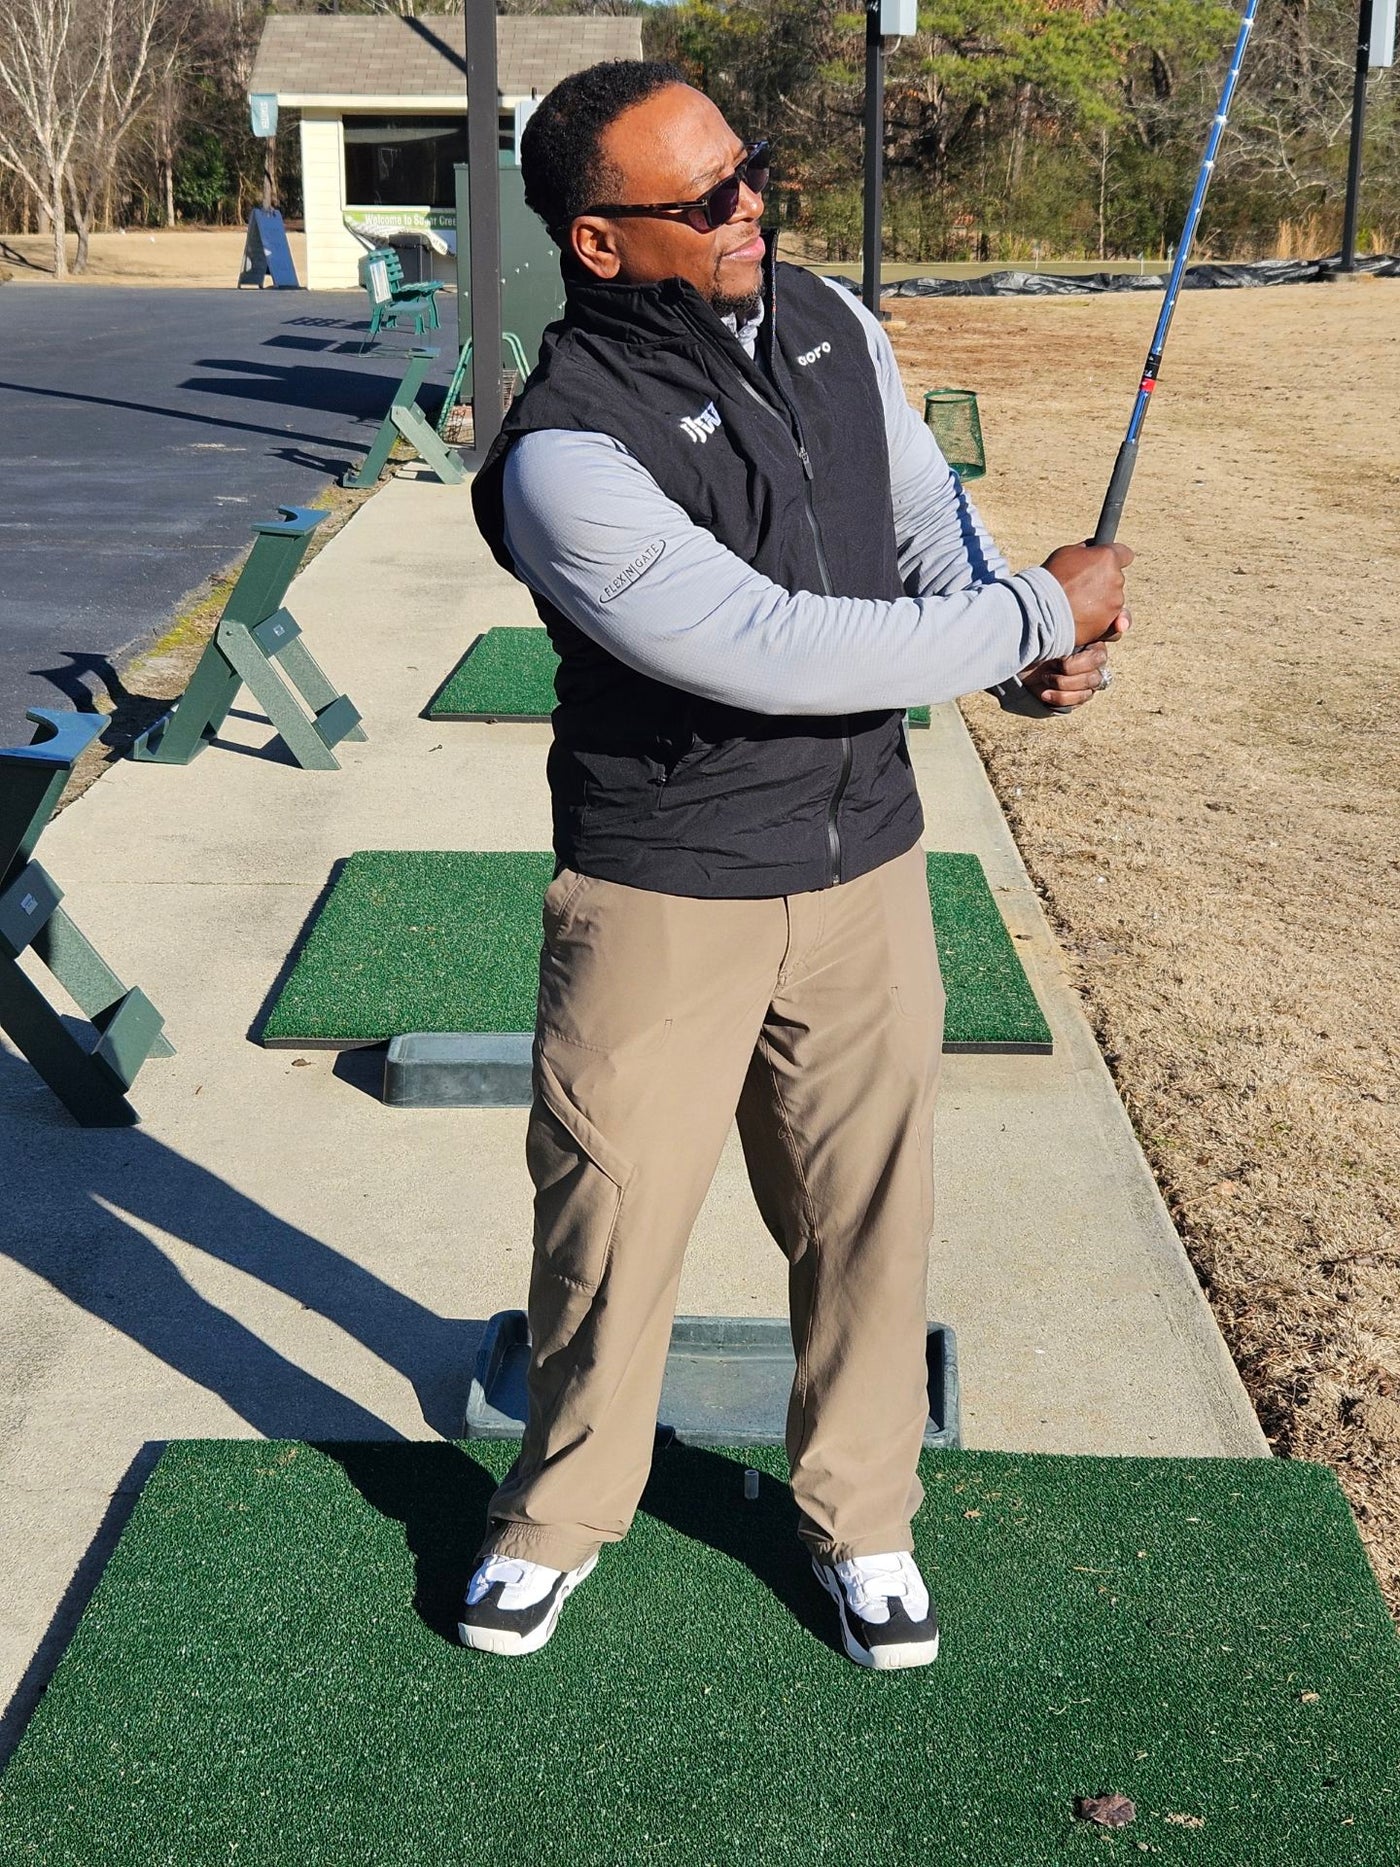 Men Heated Golf Vest Pre-Order Available